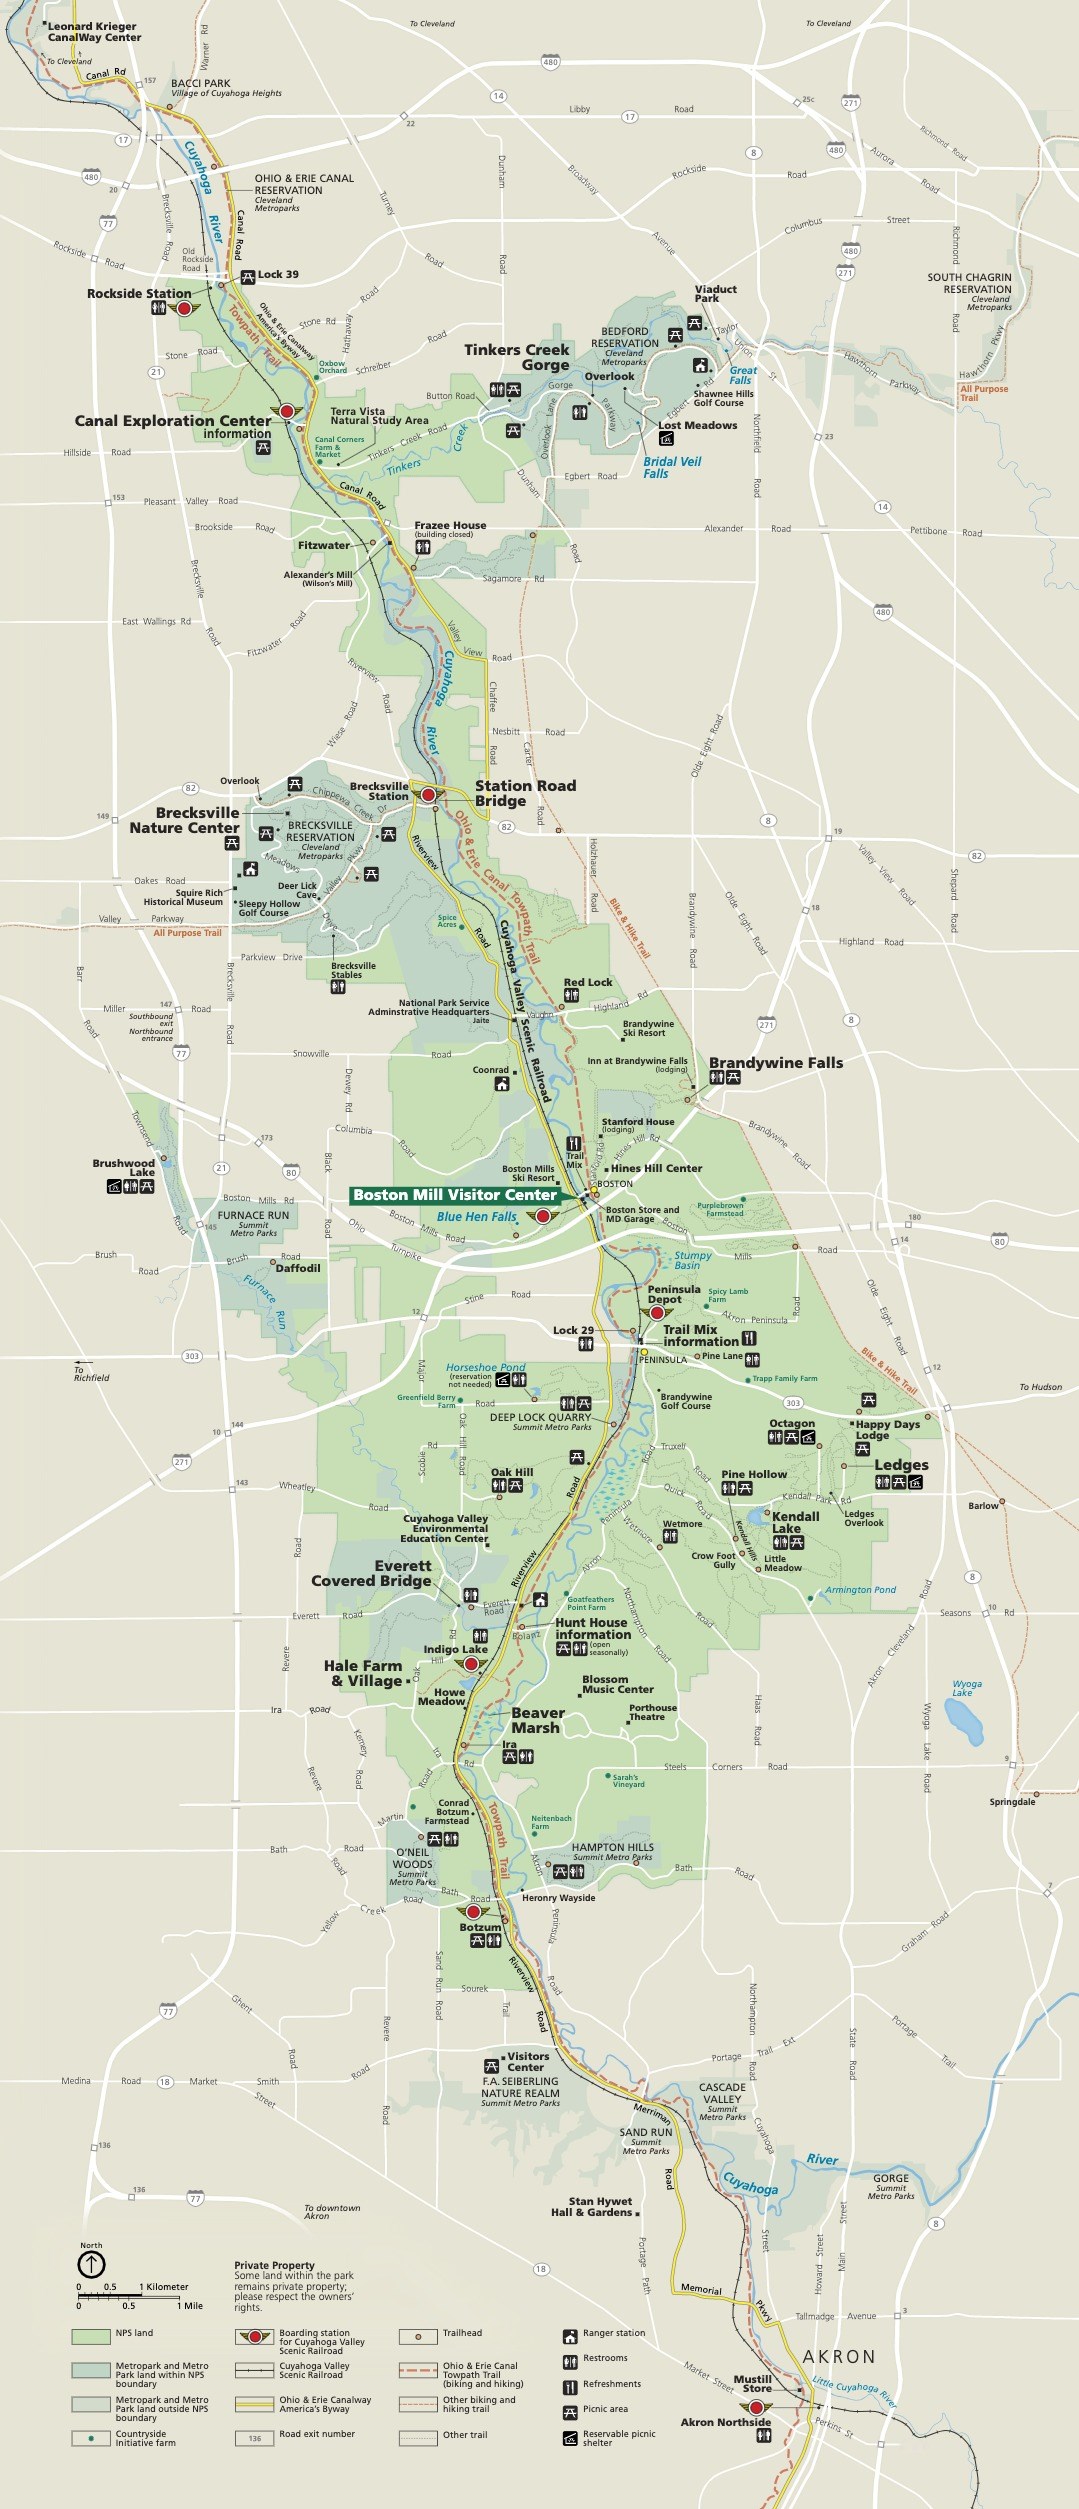 A map of the entire area of Cuyahoga Valley National Park from Rockside Station in the North to Akron in the South. Markers indicate destinations across the park as well as various amenities and roadways.